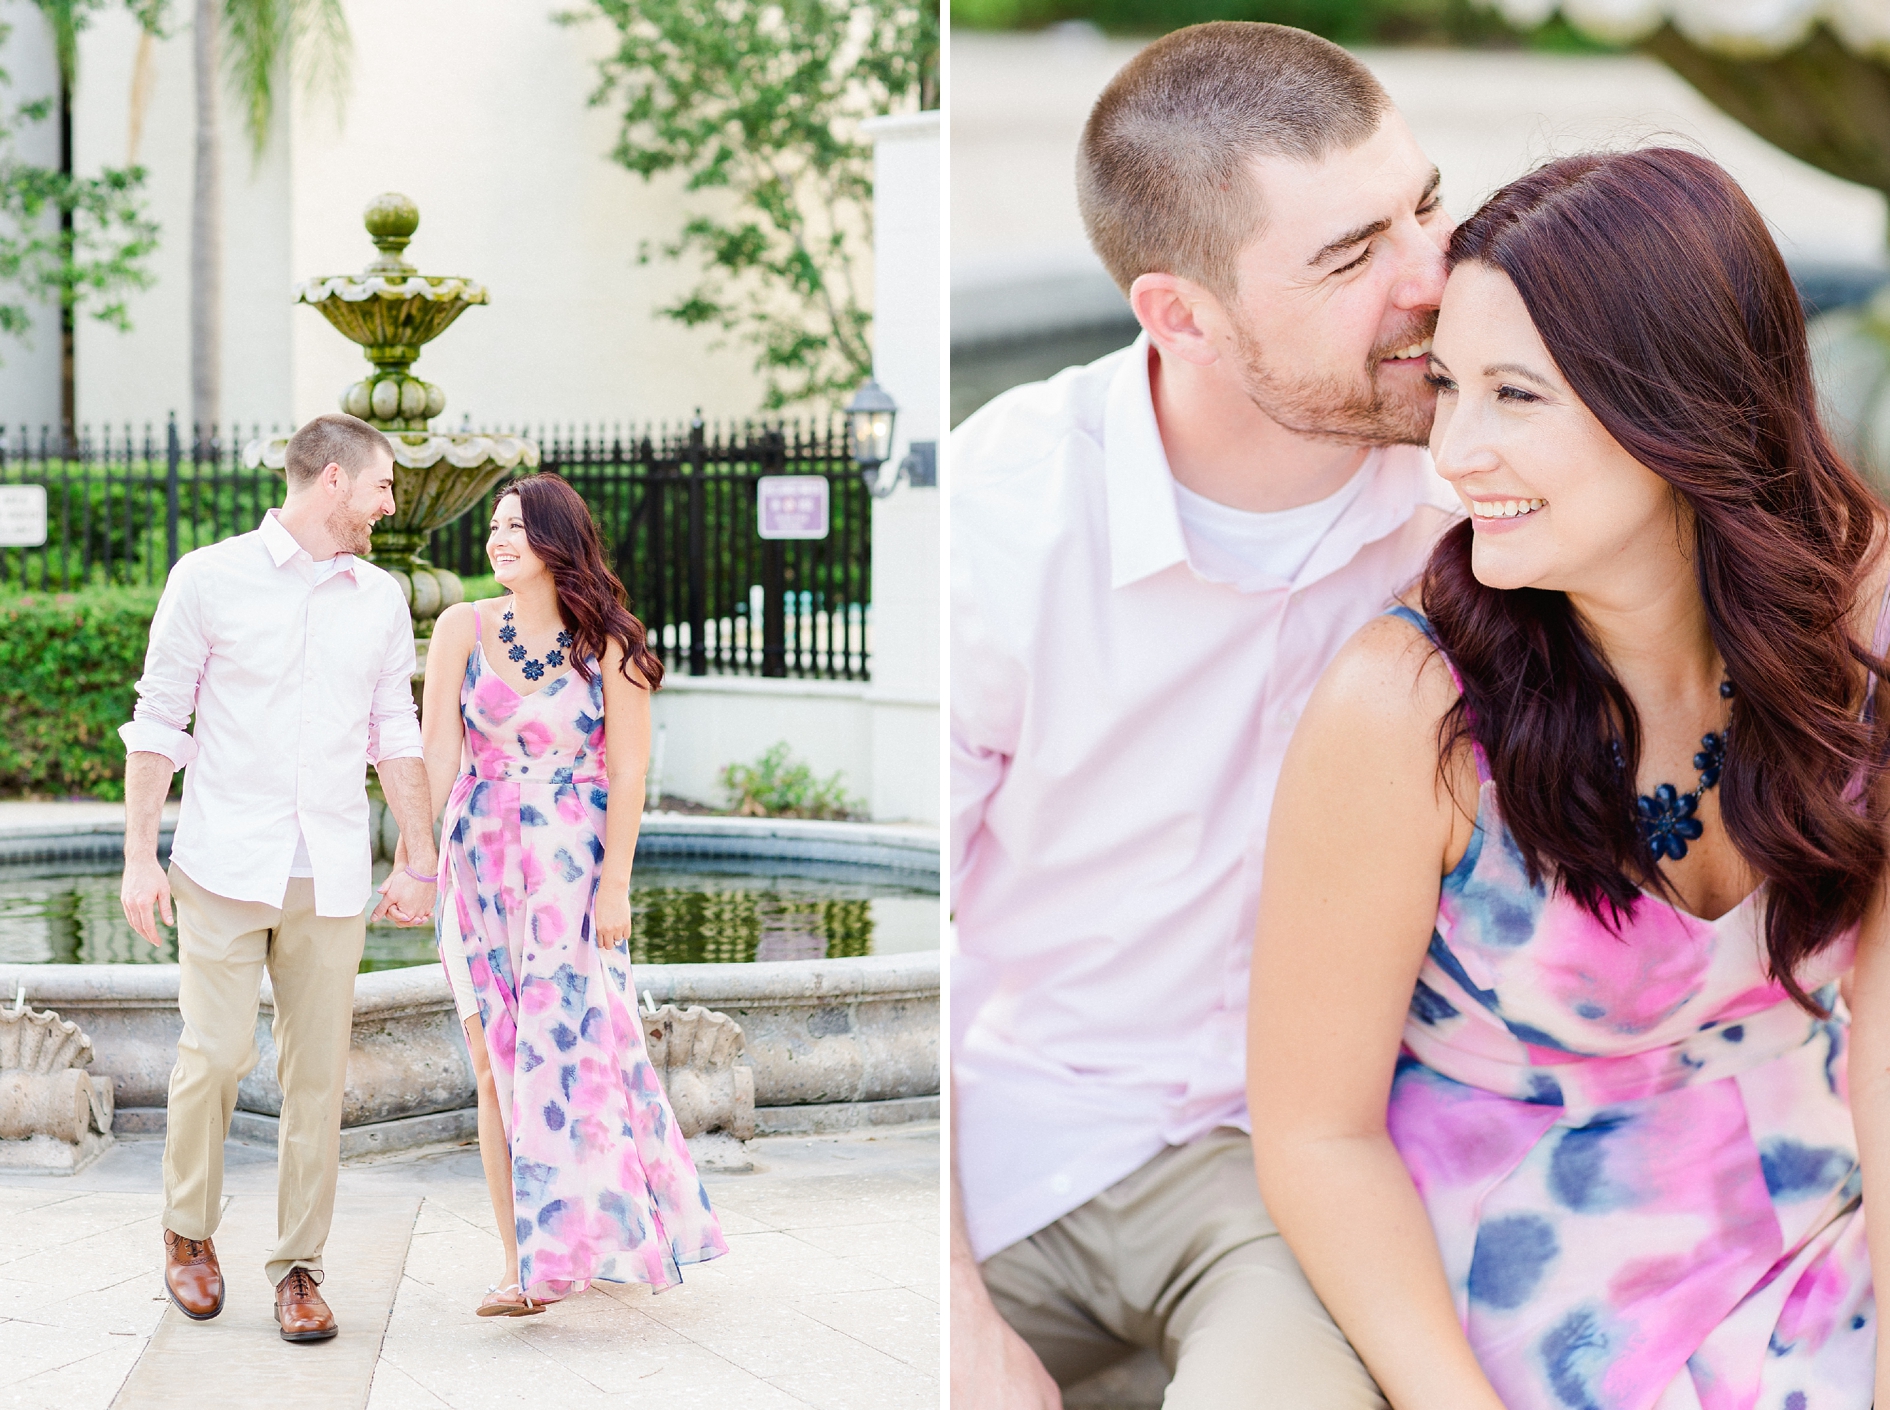 Downtown Clearwater Engagement | © Ailyn La Torre Photography 2017